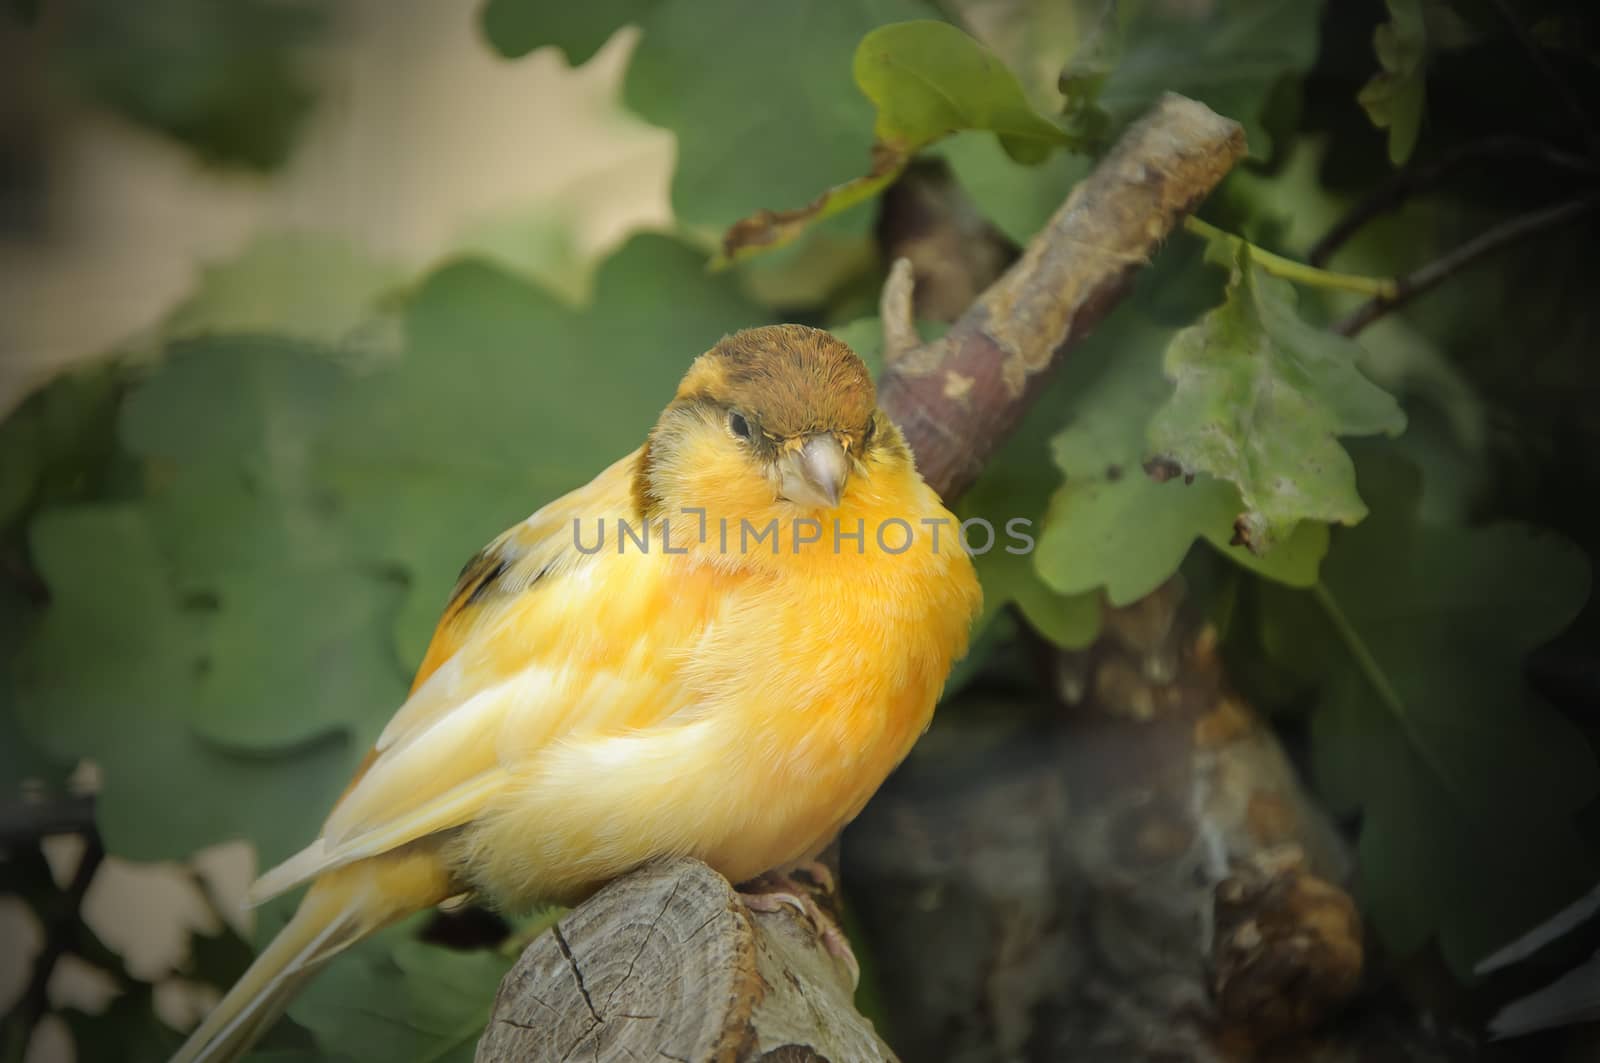 canary bird perched on a branch in the aviary